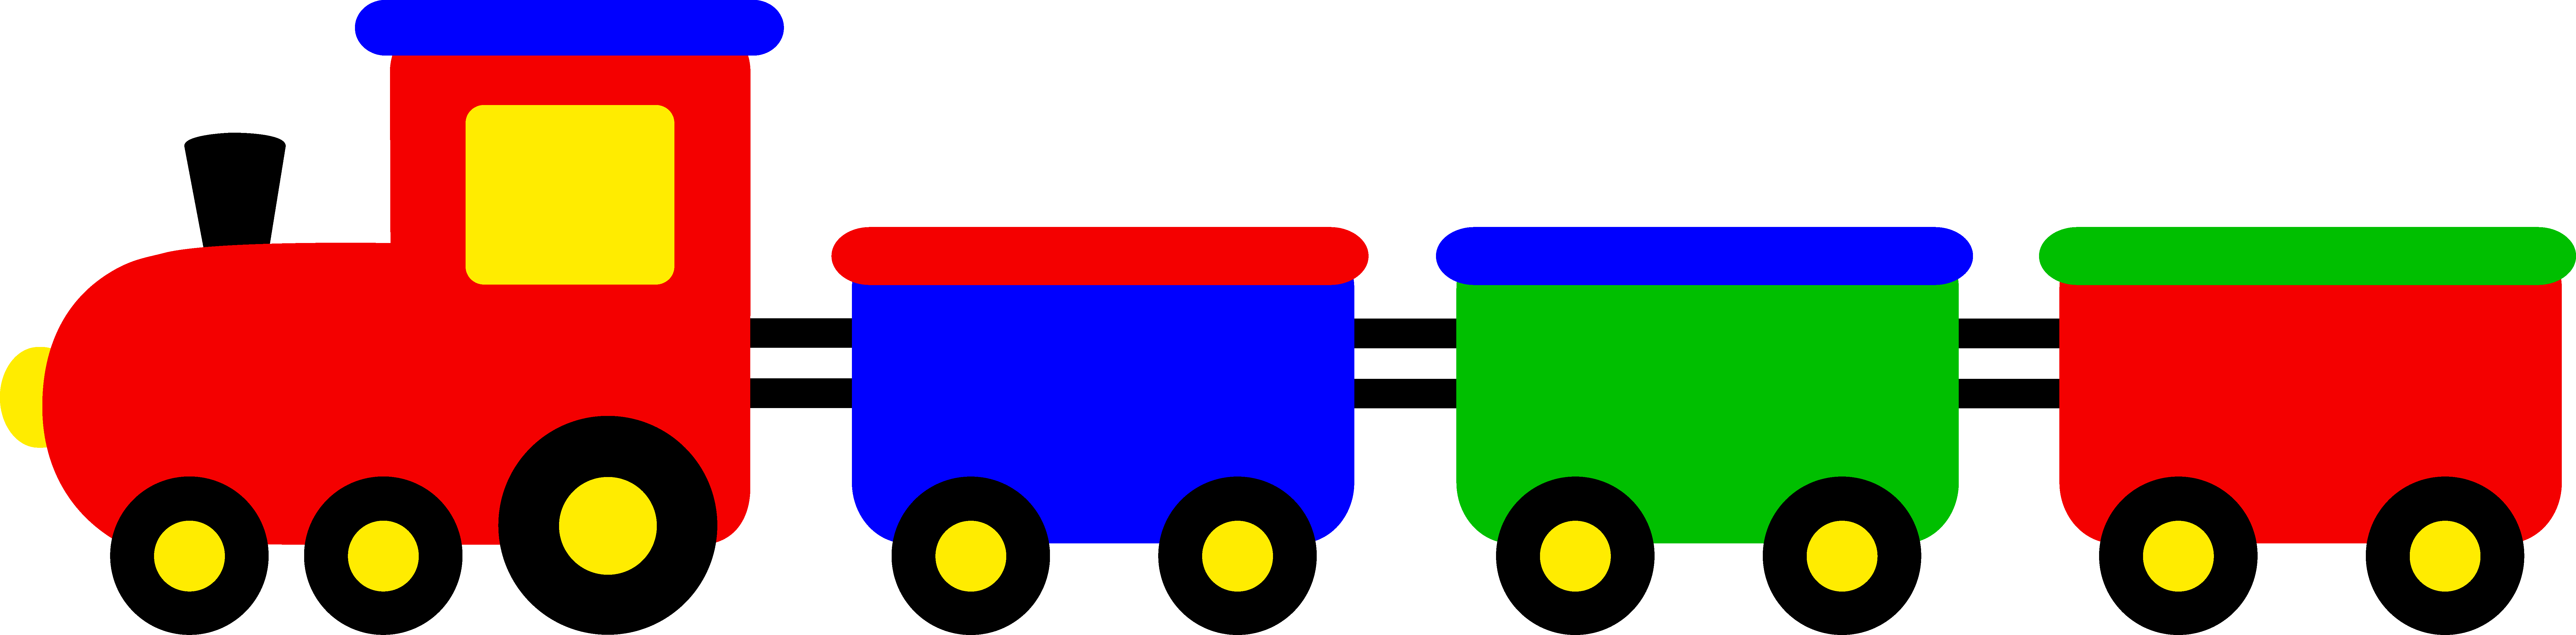 Toy trains clipart free clipart images - Cliparting.com